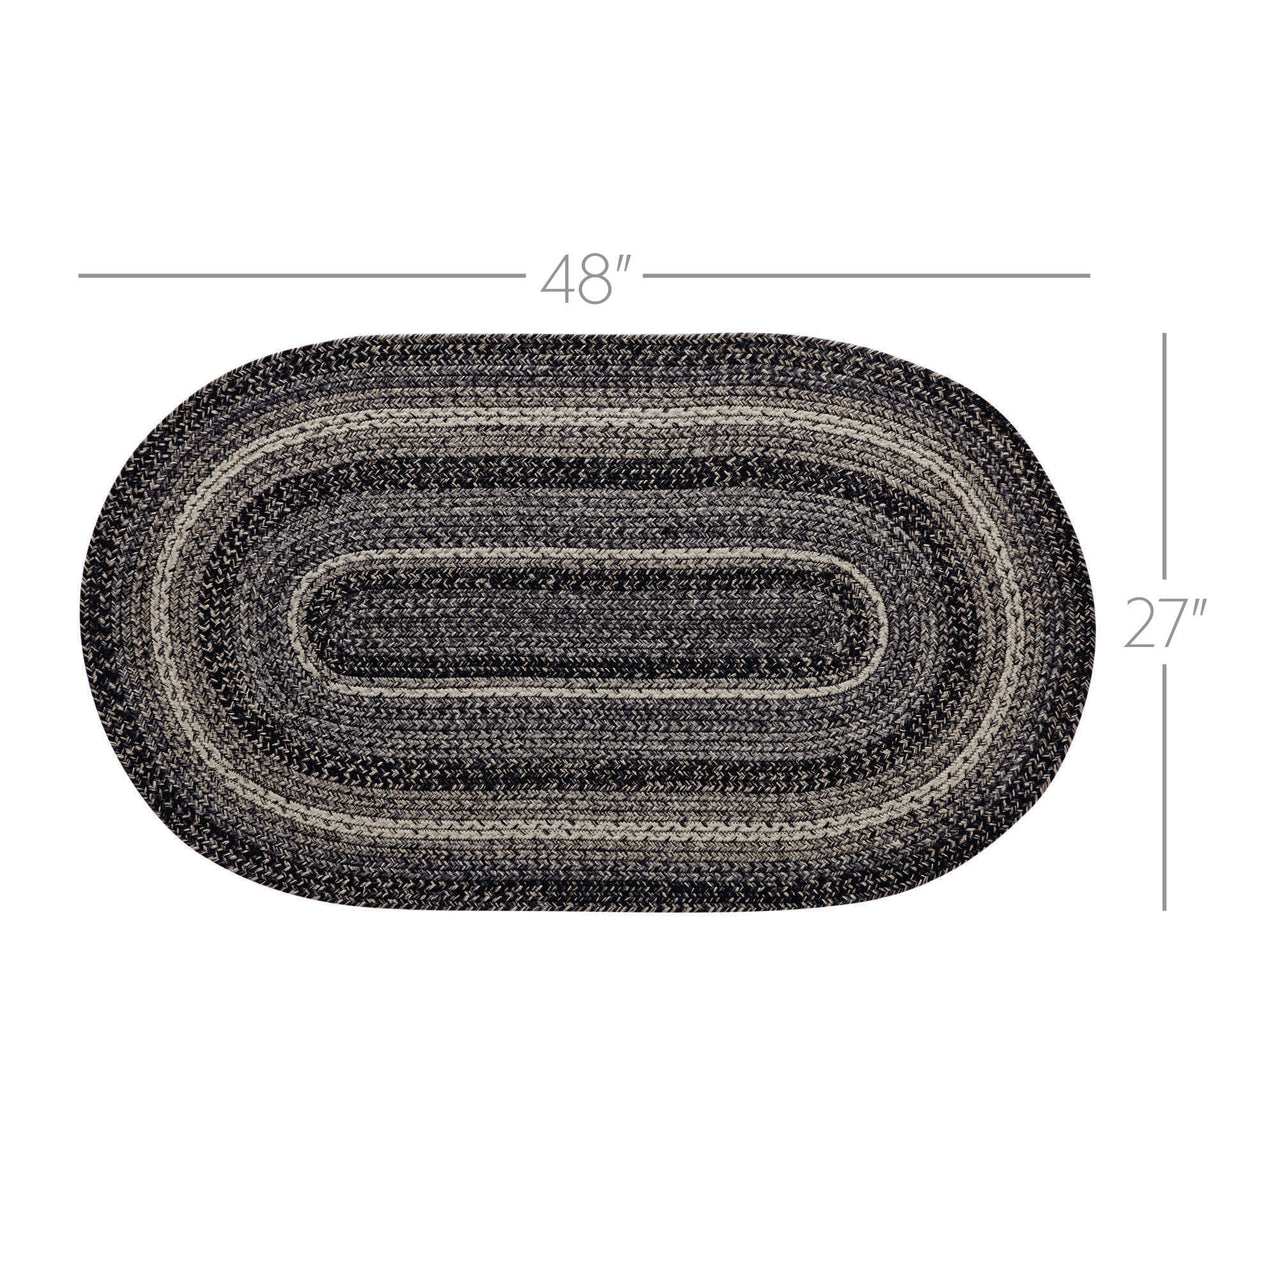 Sawyer Mill Black White Jute Braided Oval Rug with Rug Pad 27x48" VHC Brands